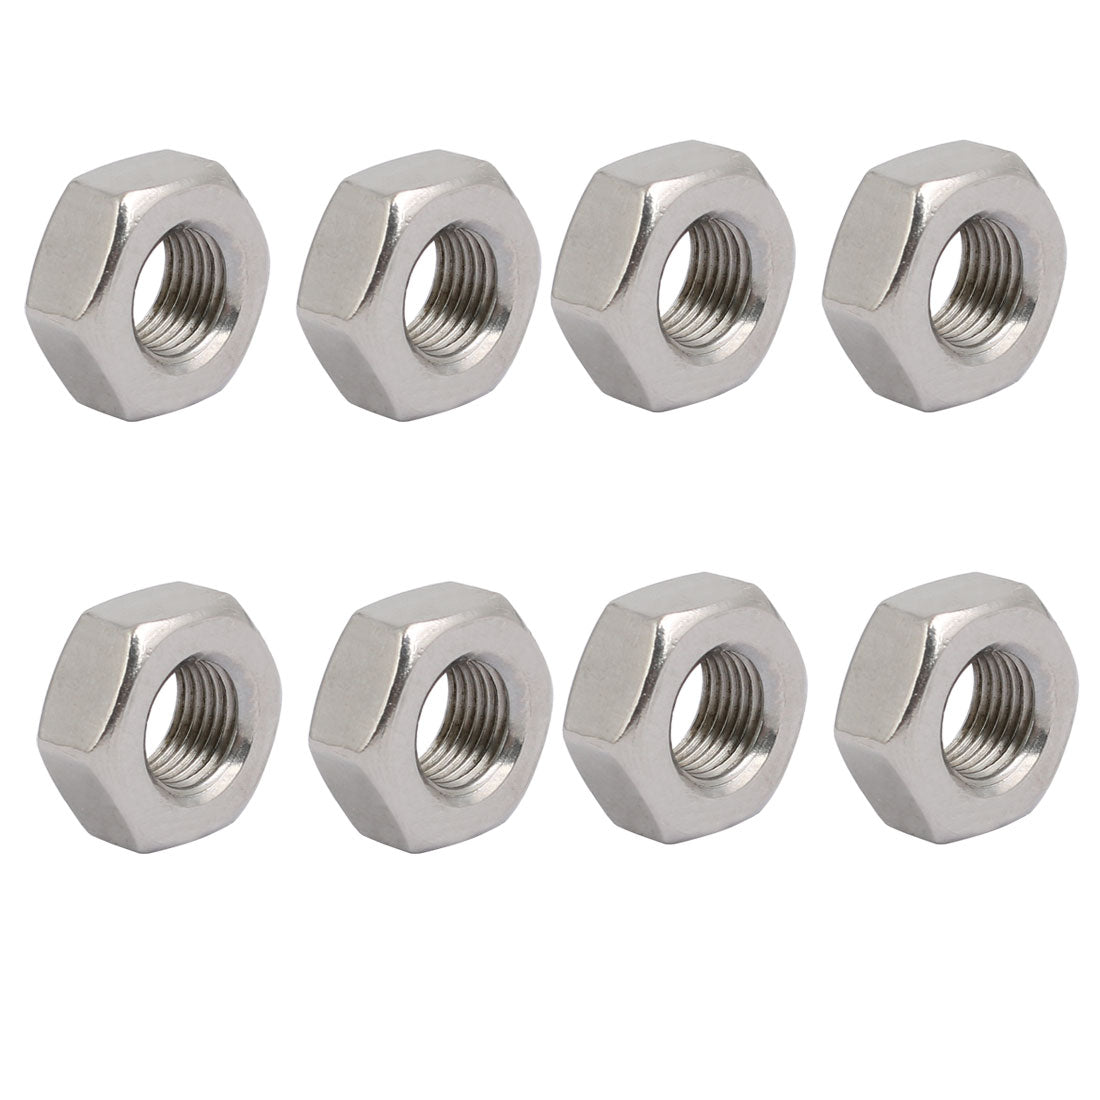 uxcell Uxcell Hex Nuts, M10x1 UNF 304 Stainless Steel Thread Hexagon Nut 8pcs